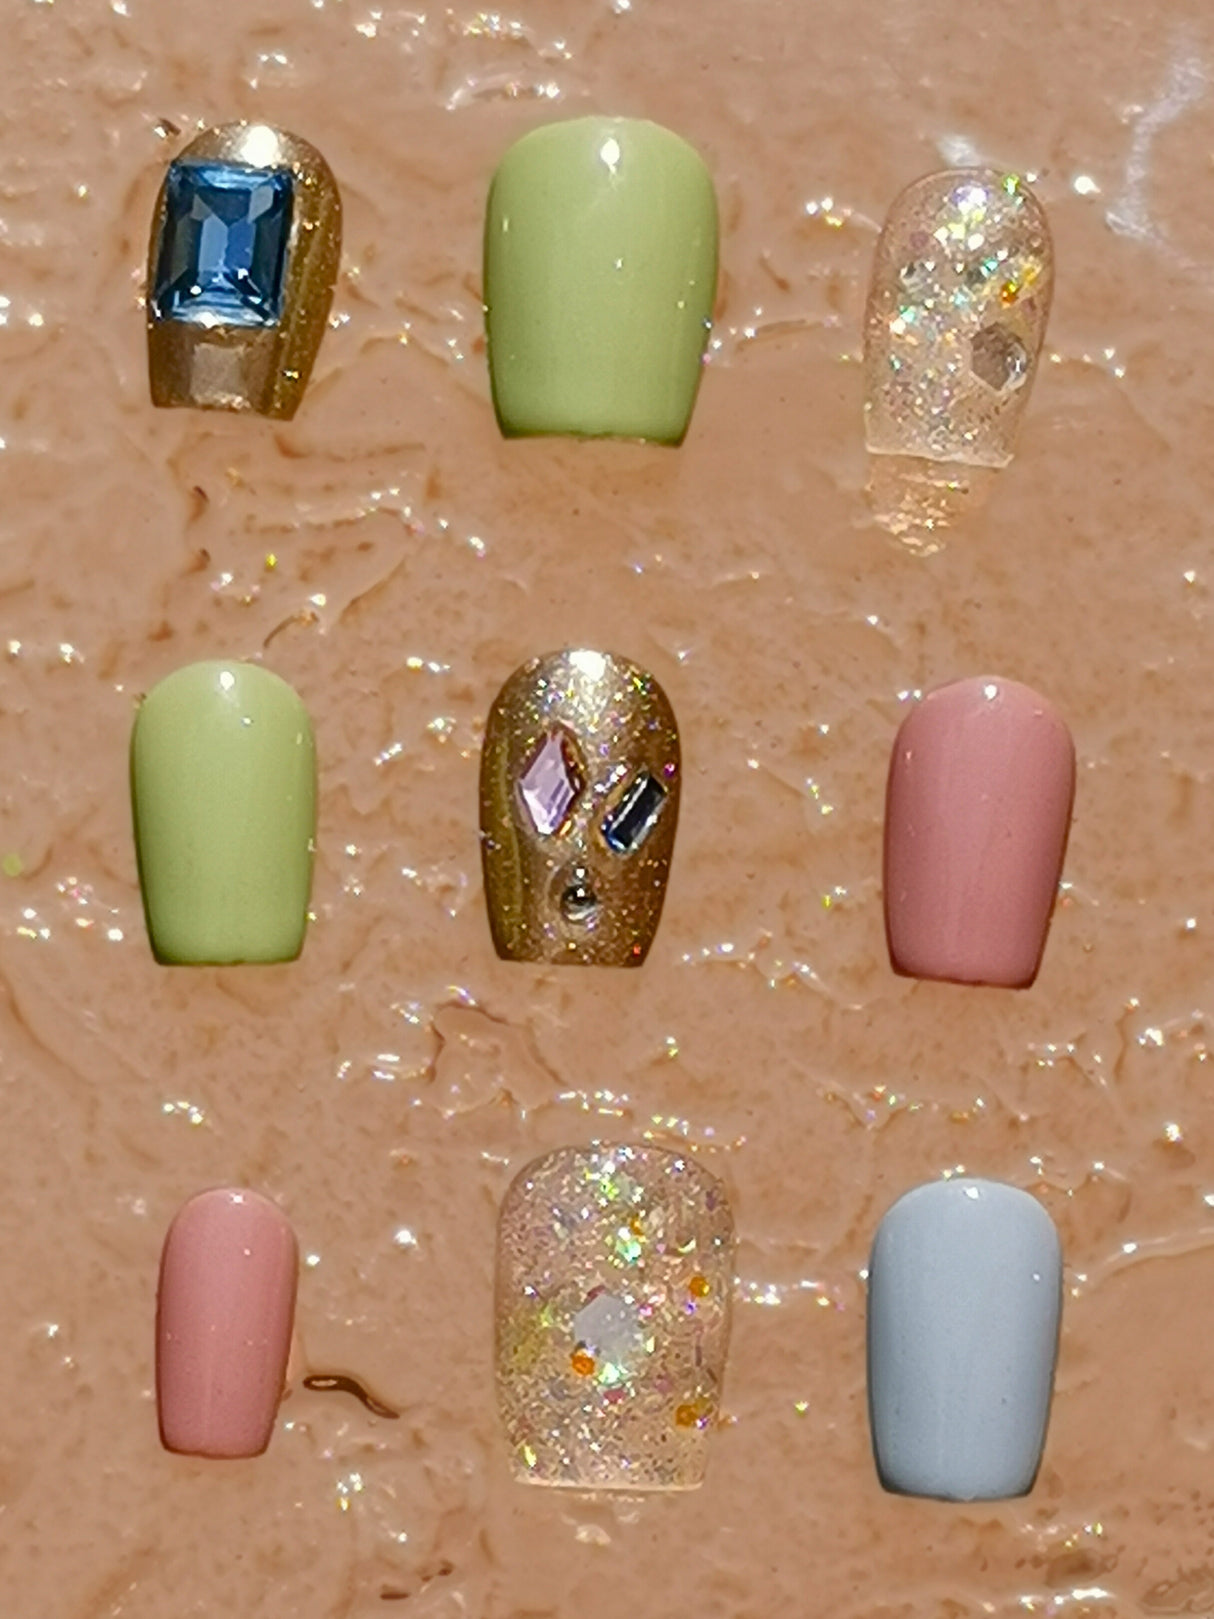 Luxury nails for cute purposes with various colors, designs, and finishes. Customizable to fit different finger sizes and shapes.